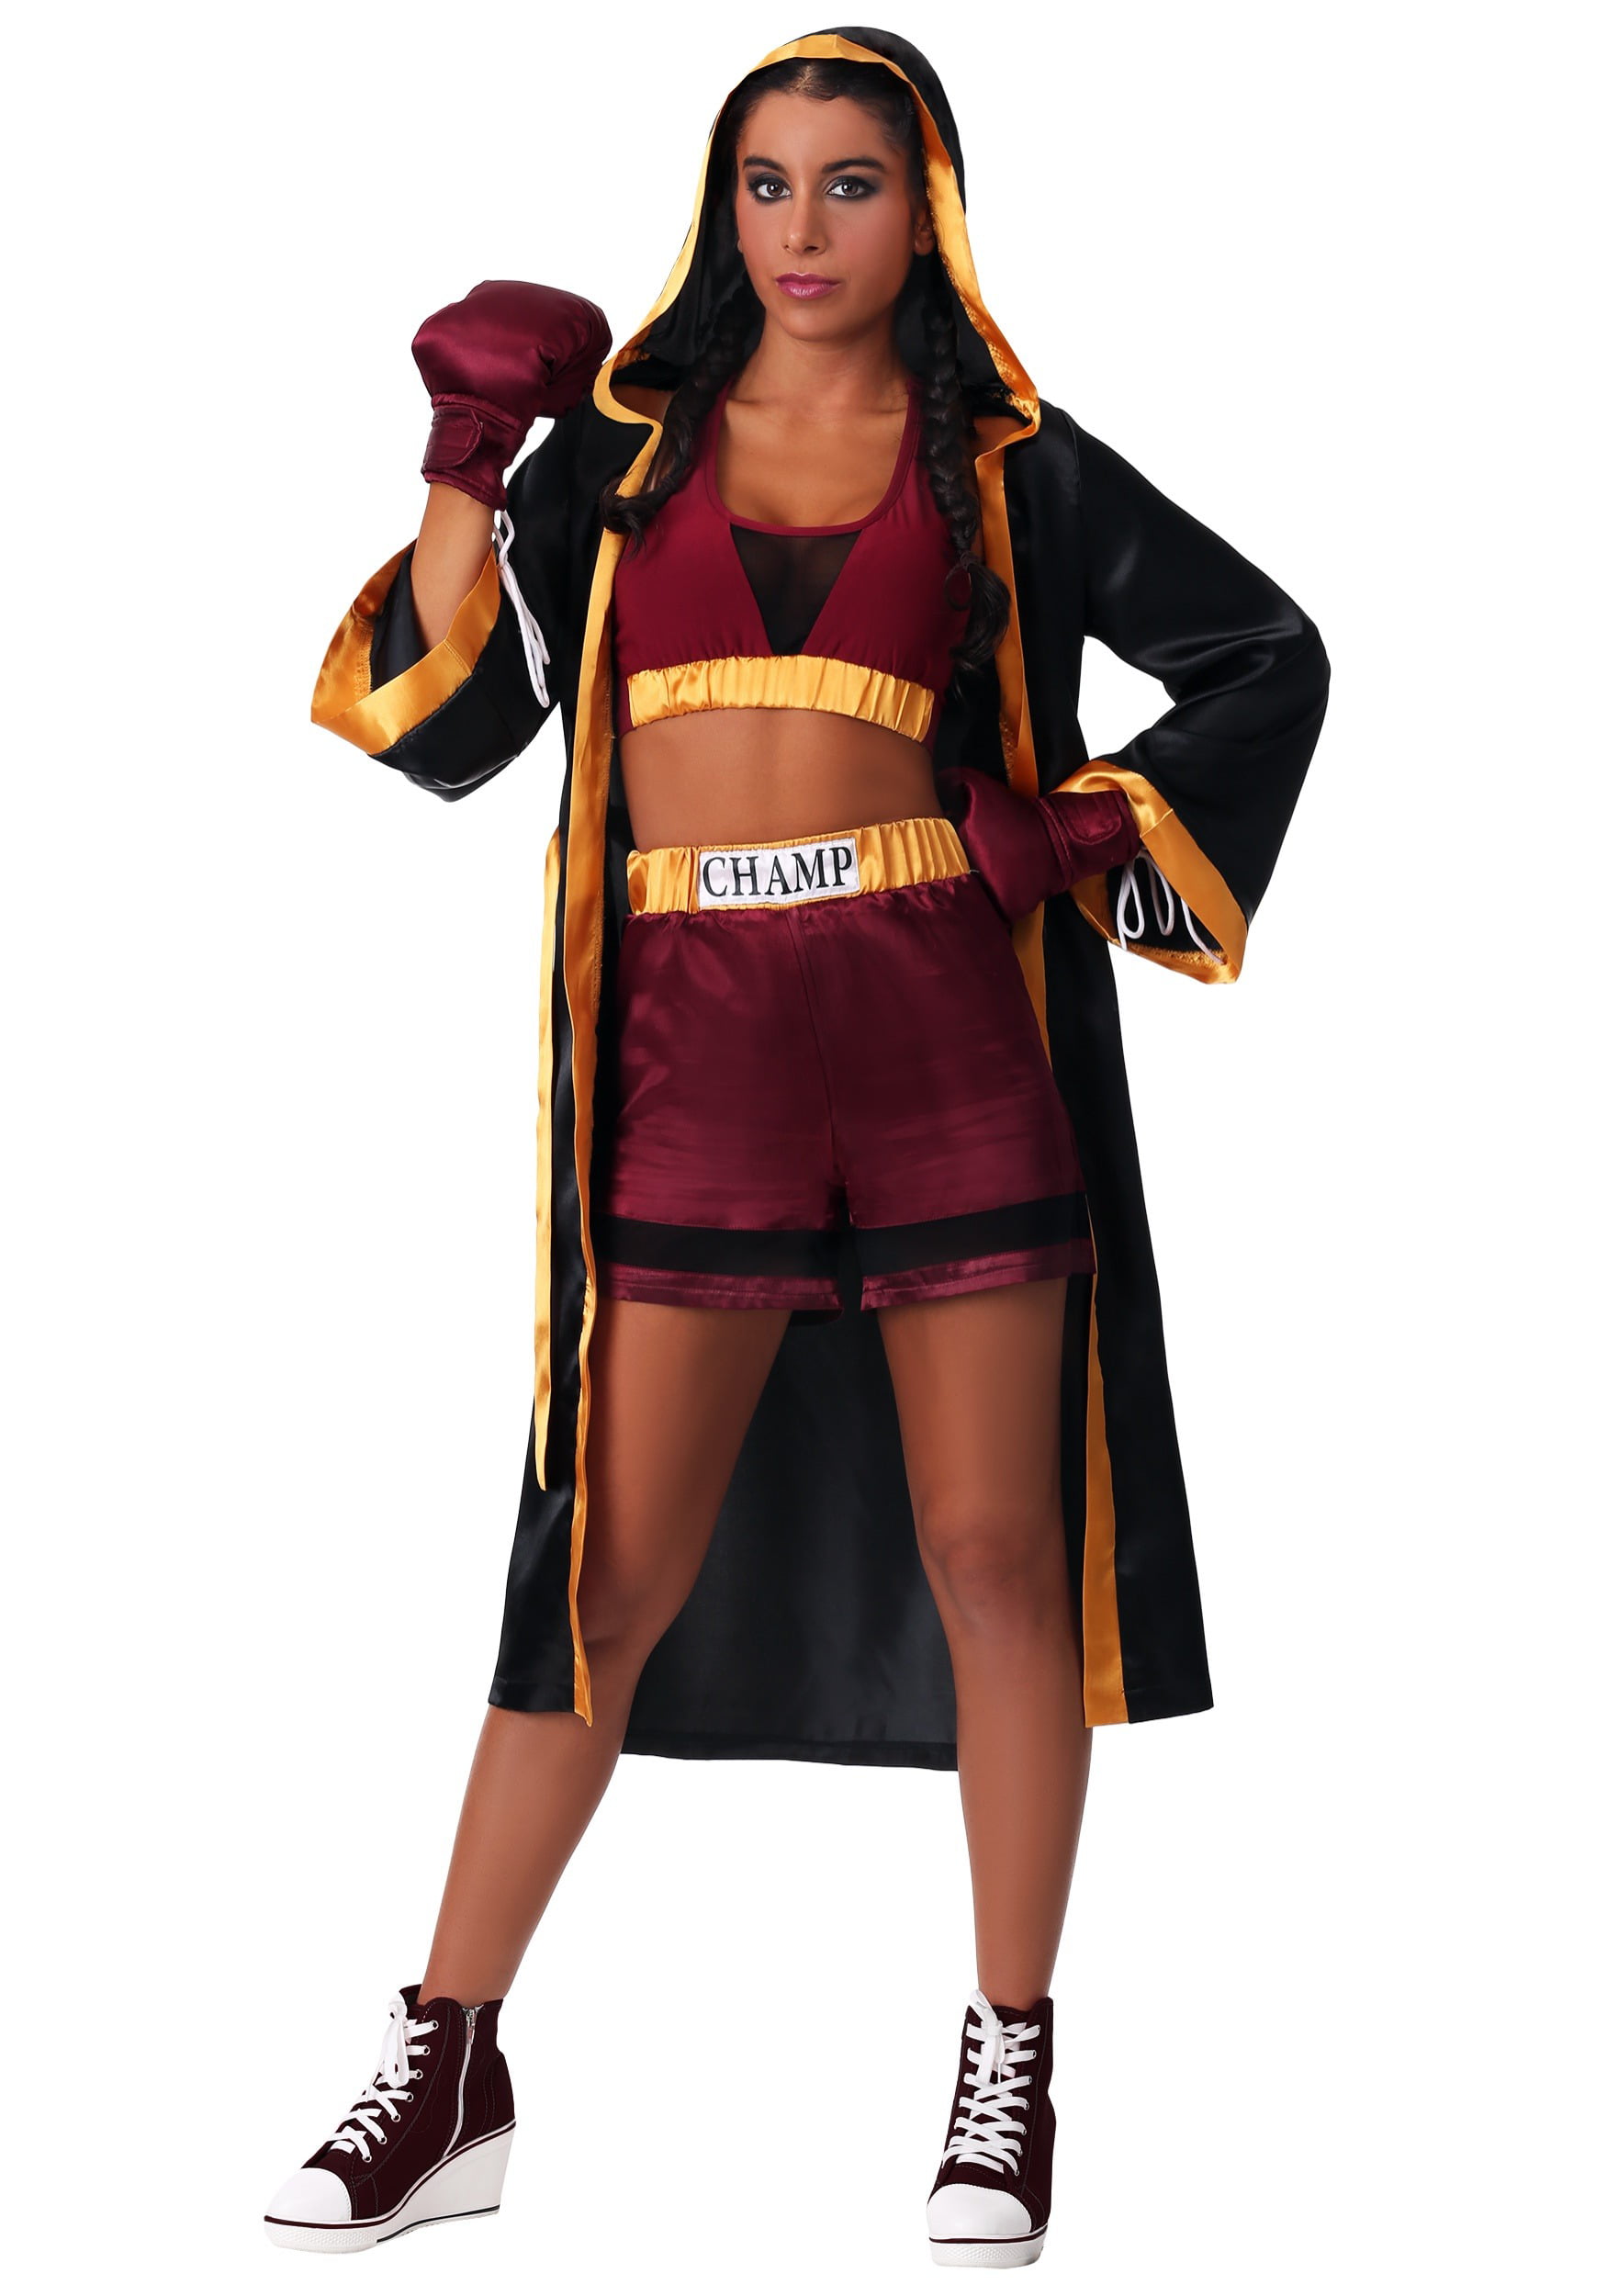 Womens Ladies Boxer Gir Fancy Dress Costume Outfit L 